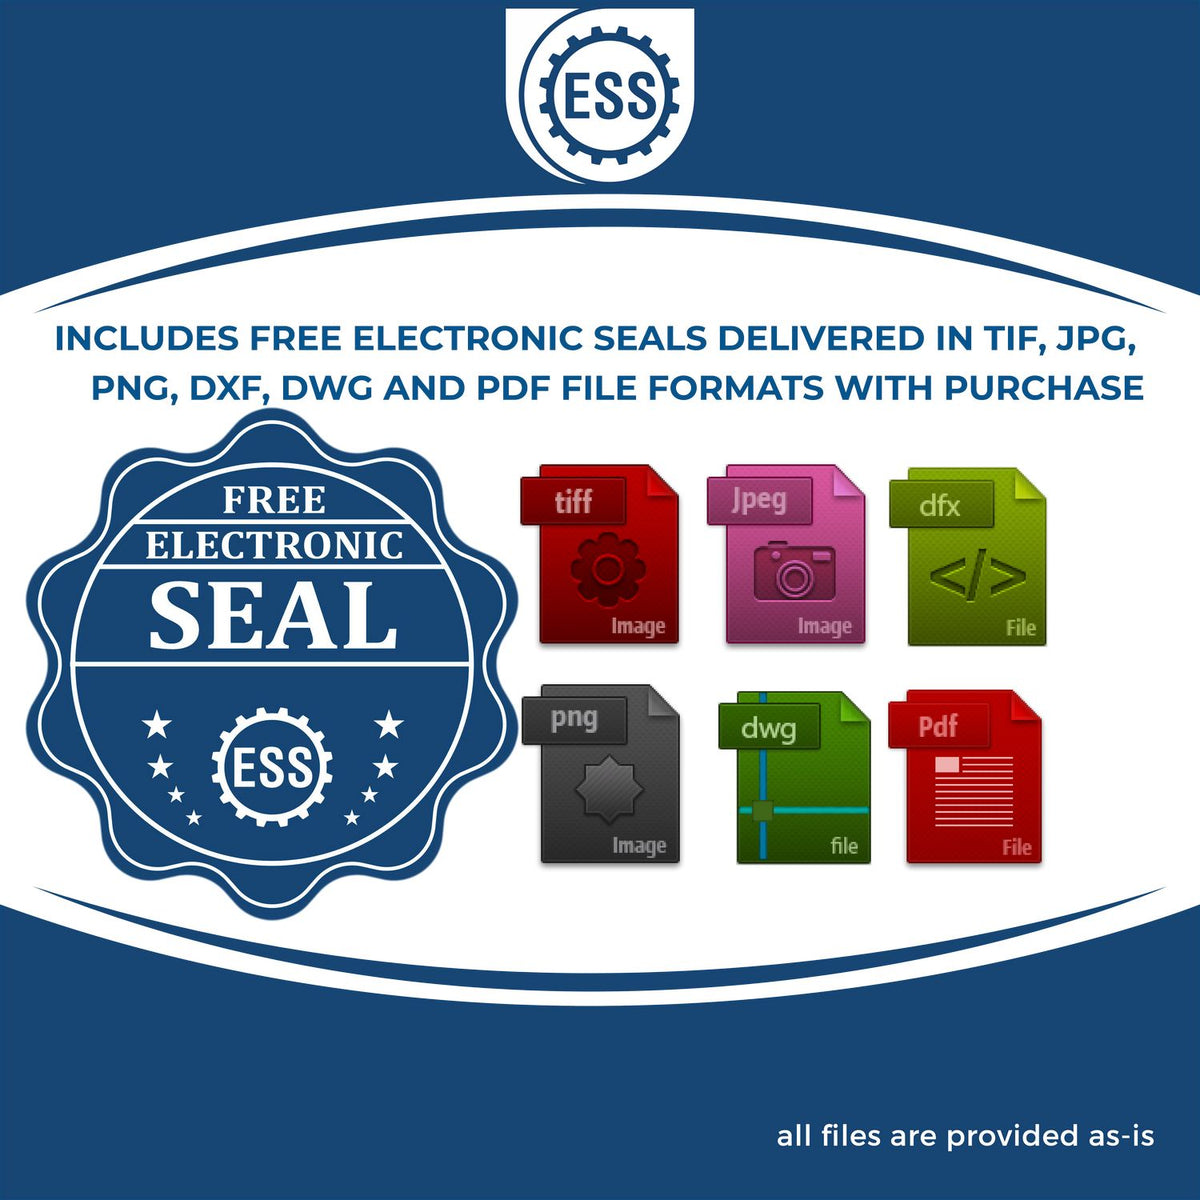 An infographic for the free electronic seal for the Premium MaxLight Pre-Inked North Dakota Geology Stamp illustrating the different file type icons such as DXF, DWG, TIF, JPG and PNG.